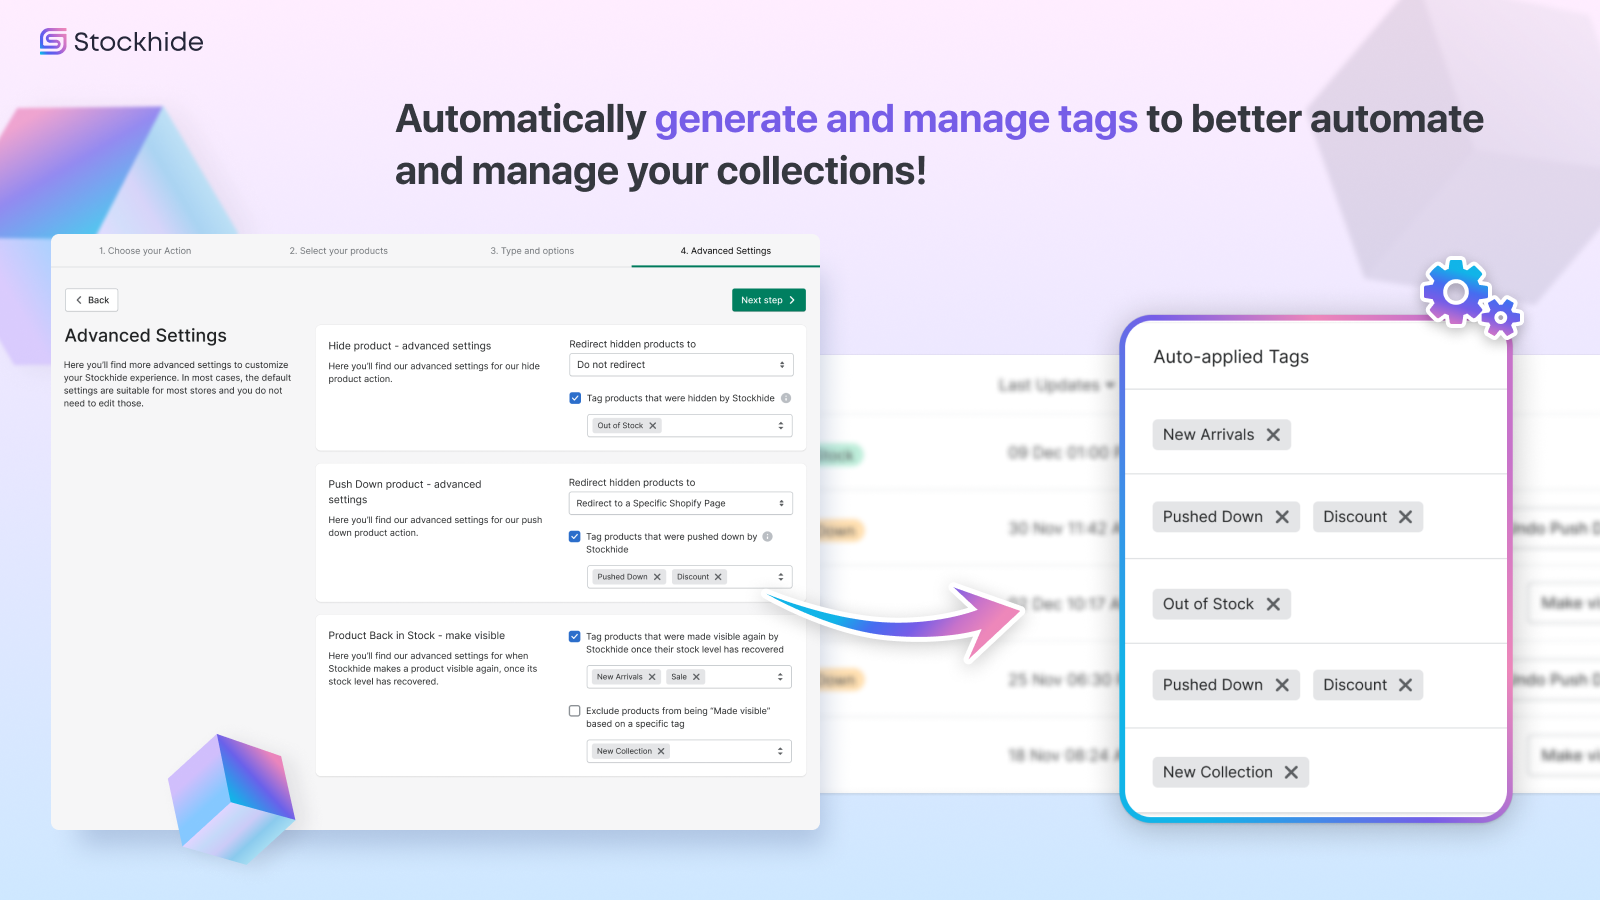 Automatically generate and manage tags for better automations